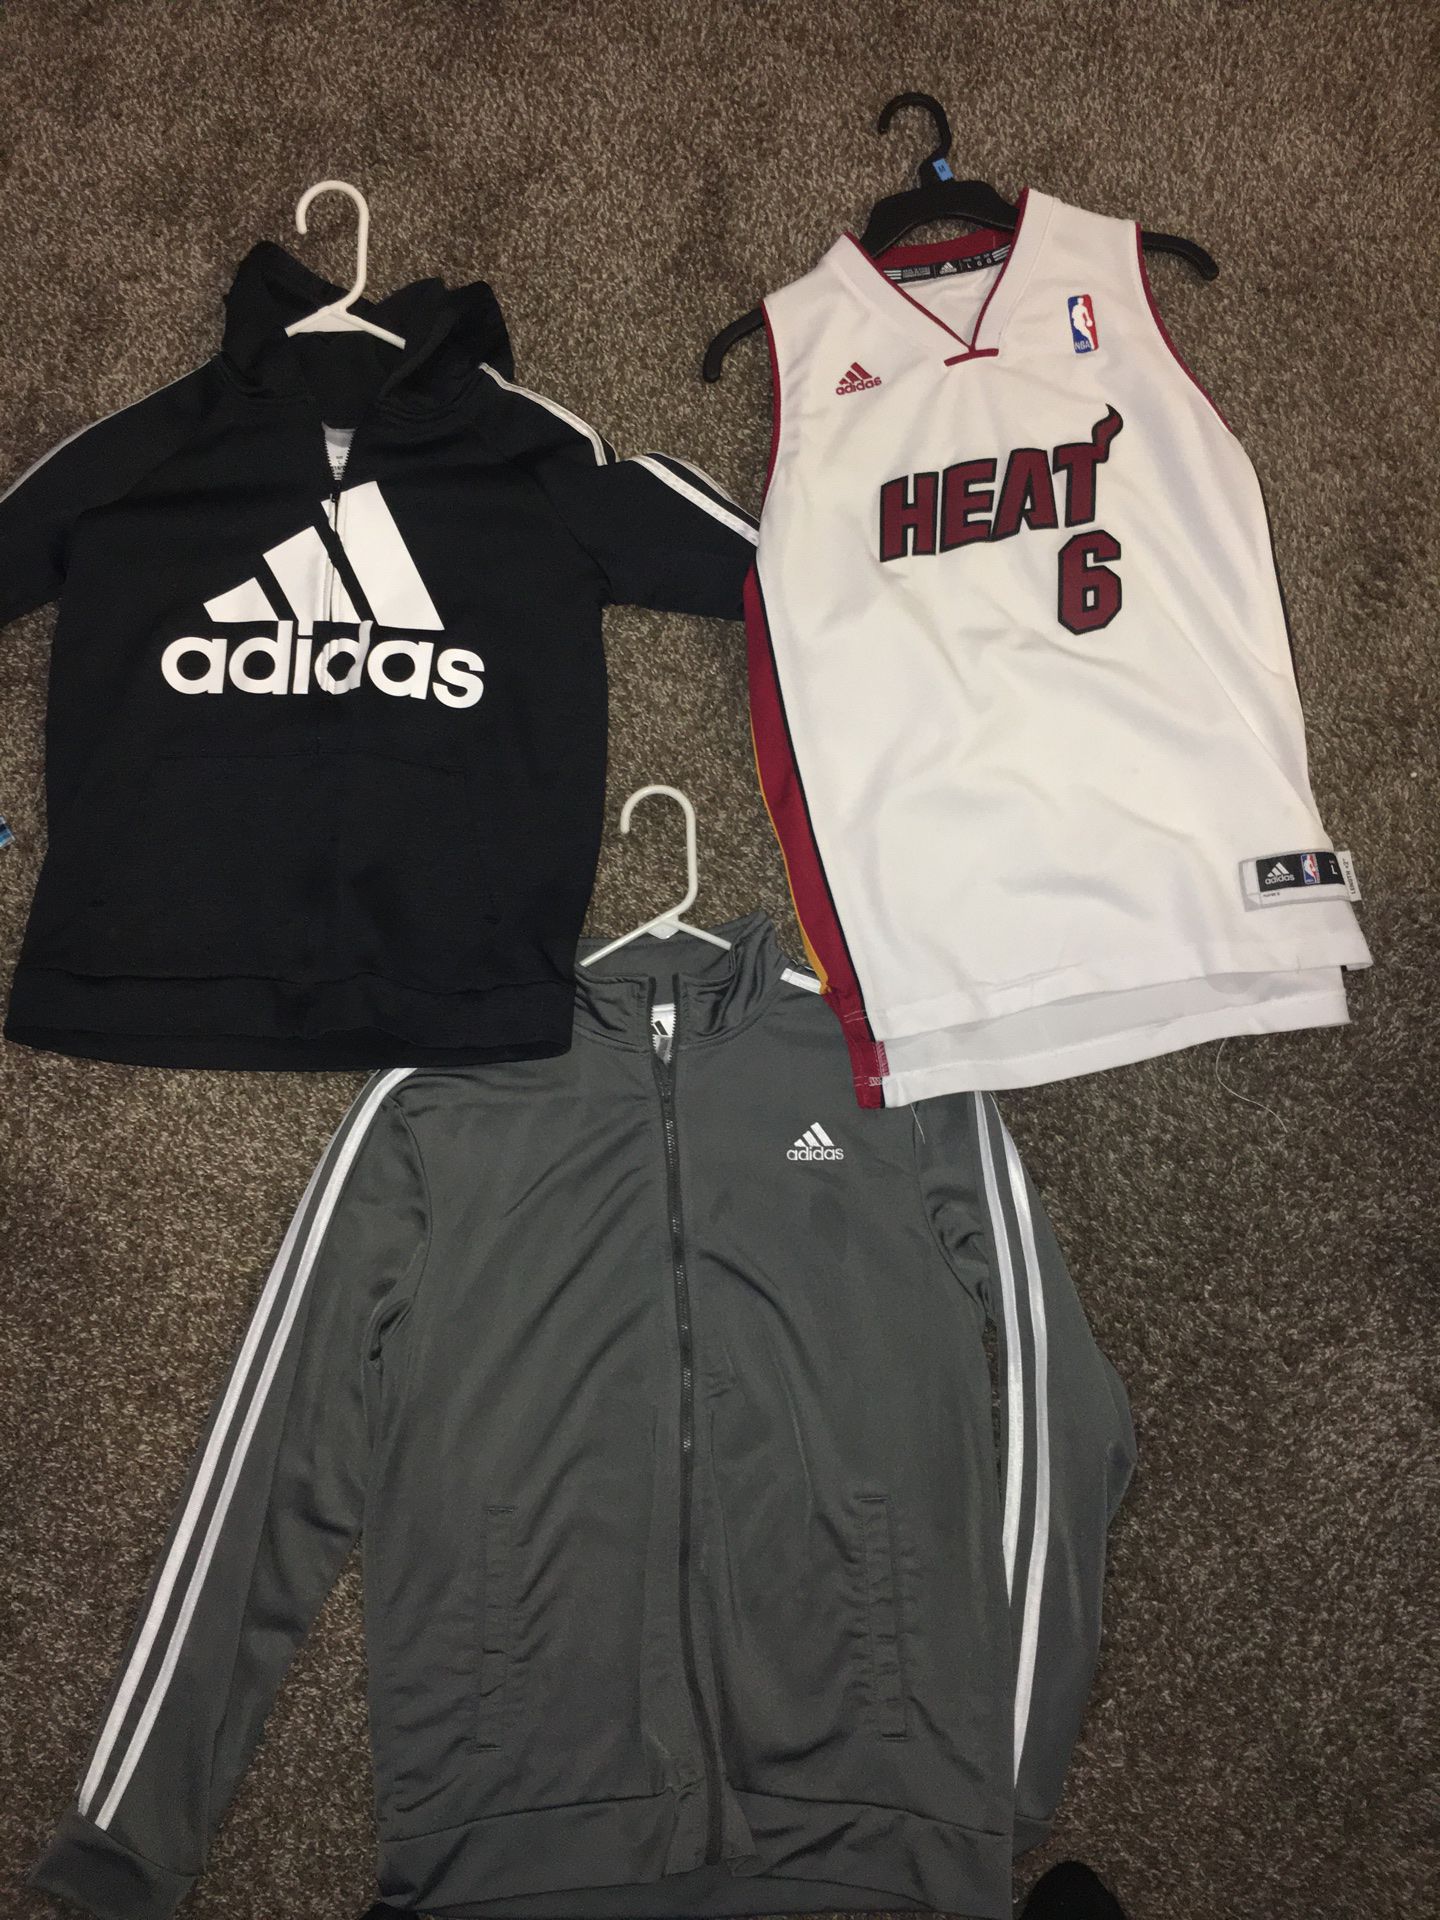 Adidas lebron Jersey and 2 hoodies all Large youth